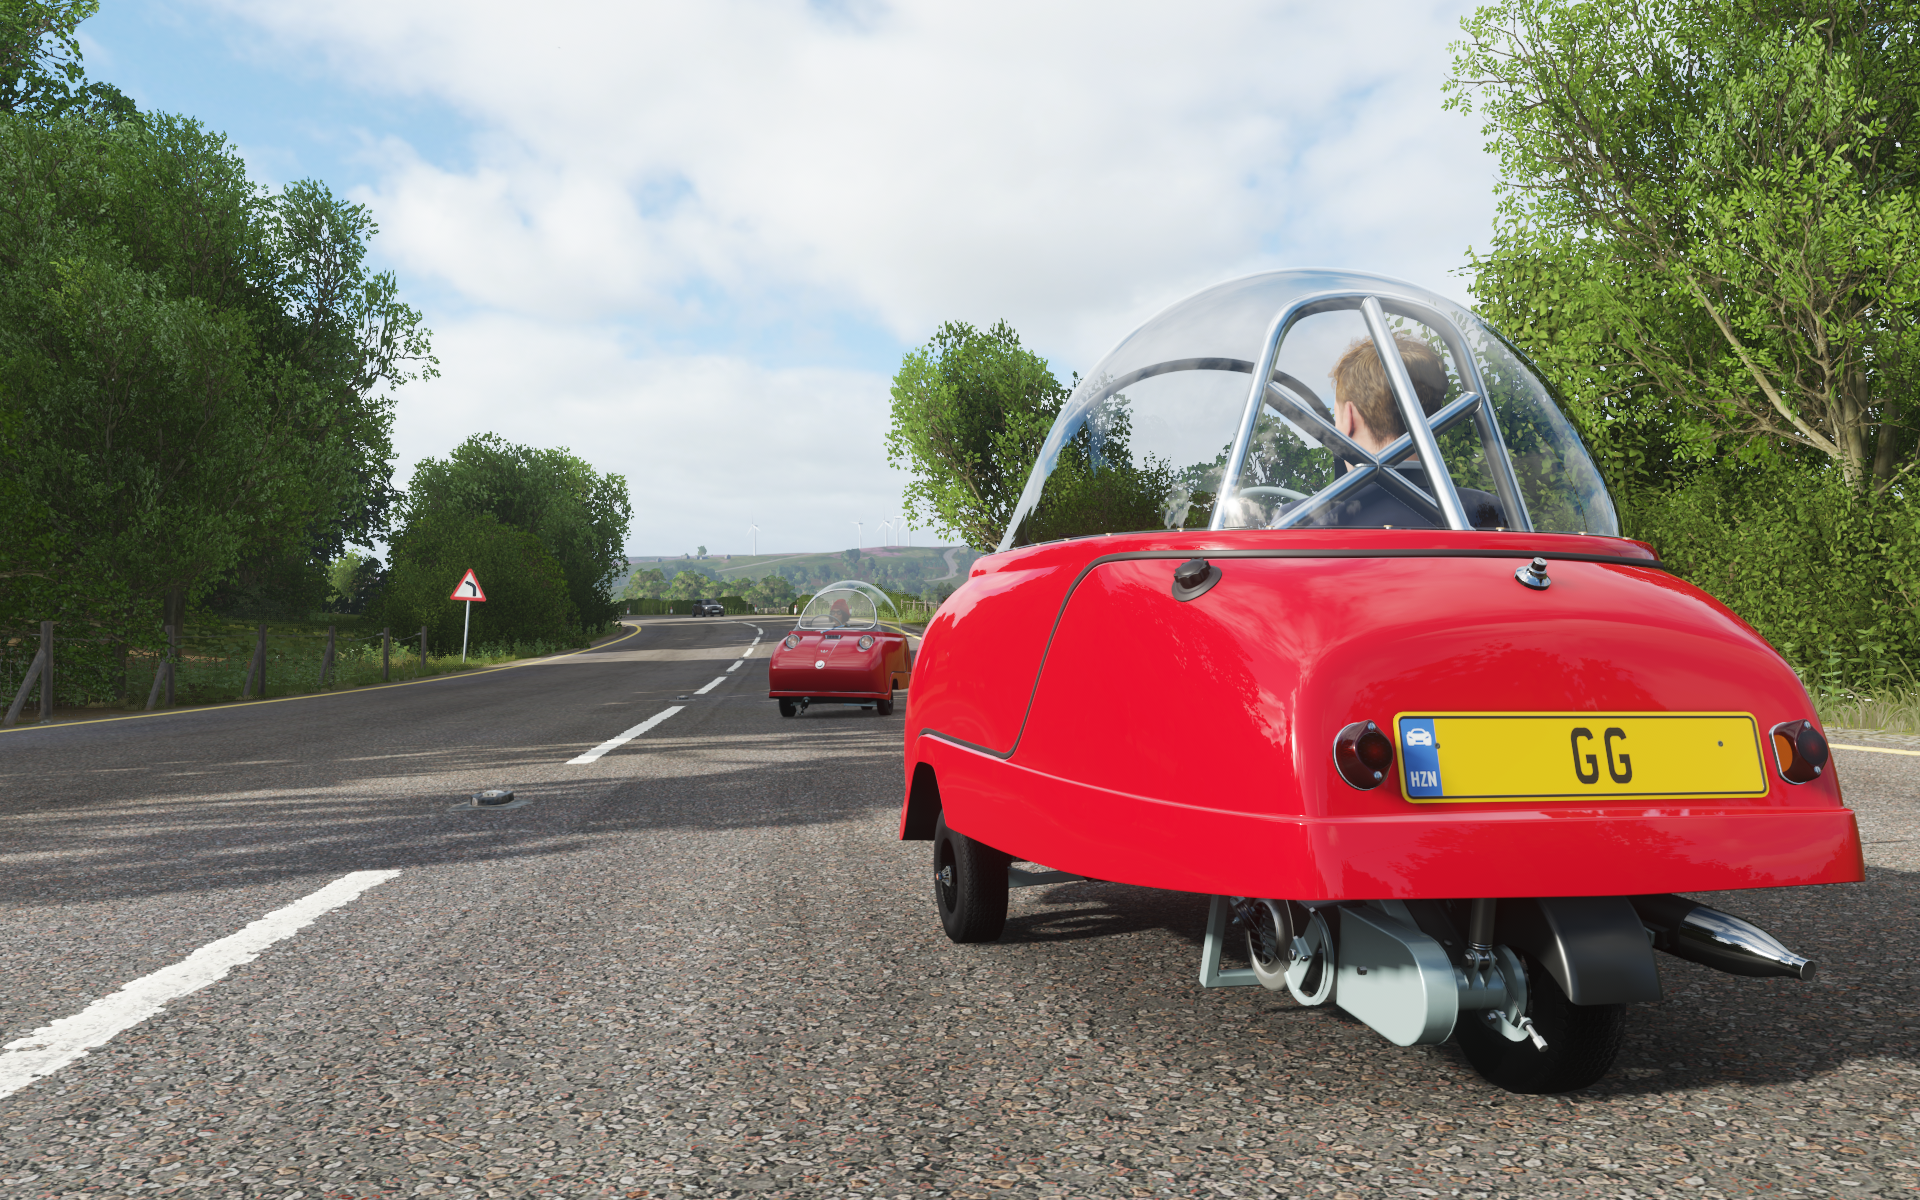 General 1920x1200 Forza Forza Horizon Forza Horizon 4 road video games rear view video game art screen shot video game characters CGI sky clouds driving trees licence plates sign British cars PlaygroundGames